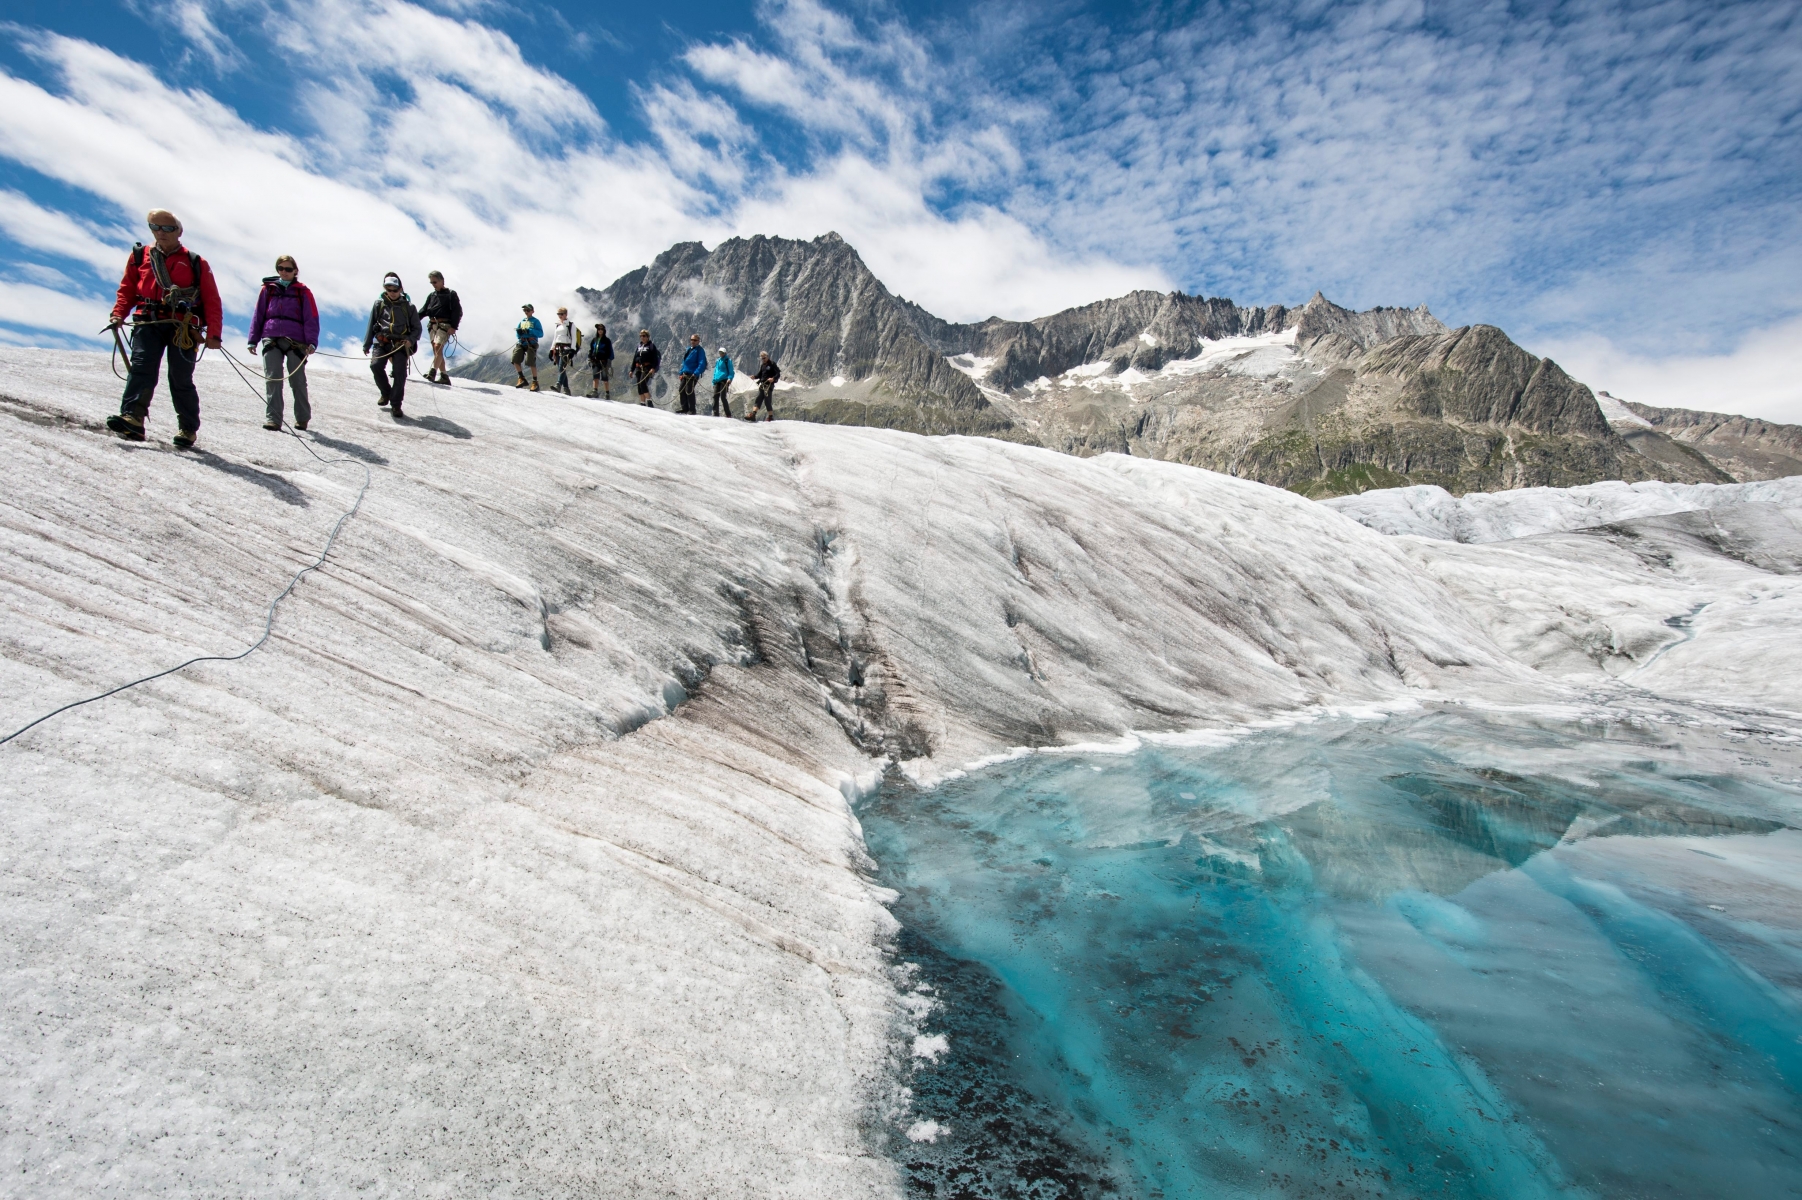 Tourists passing by a small lake during a guided tour on the Aletsch glacier, in Fiesch, Switzerland, Tuesday, July 28, 2015. With 23 kilometers is the Aletsch glacier the longest glacier of Europe and belongs to the UNESCO world heritage sites. (KEYSTONE/Dominic Steinmann) SCHWEIZ ALETSCH GLACIER GUIDED TOUR